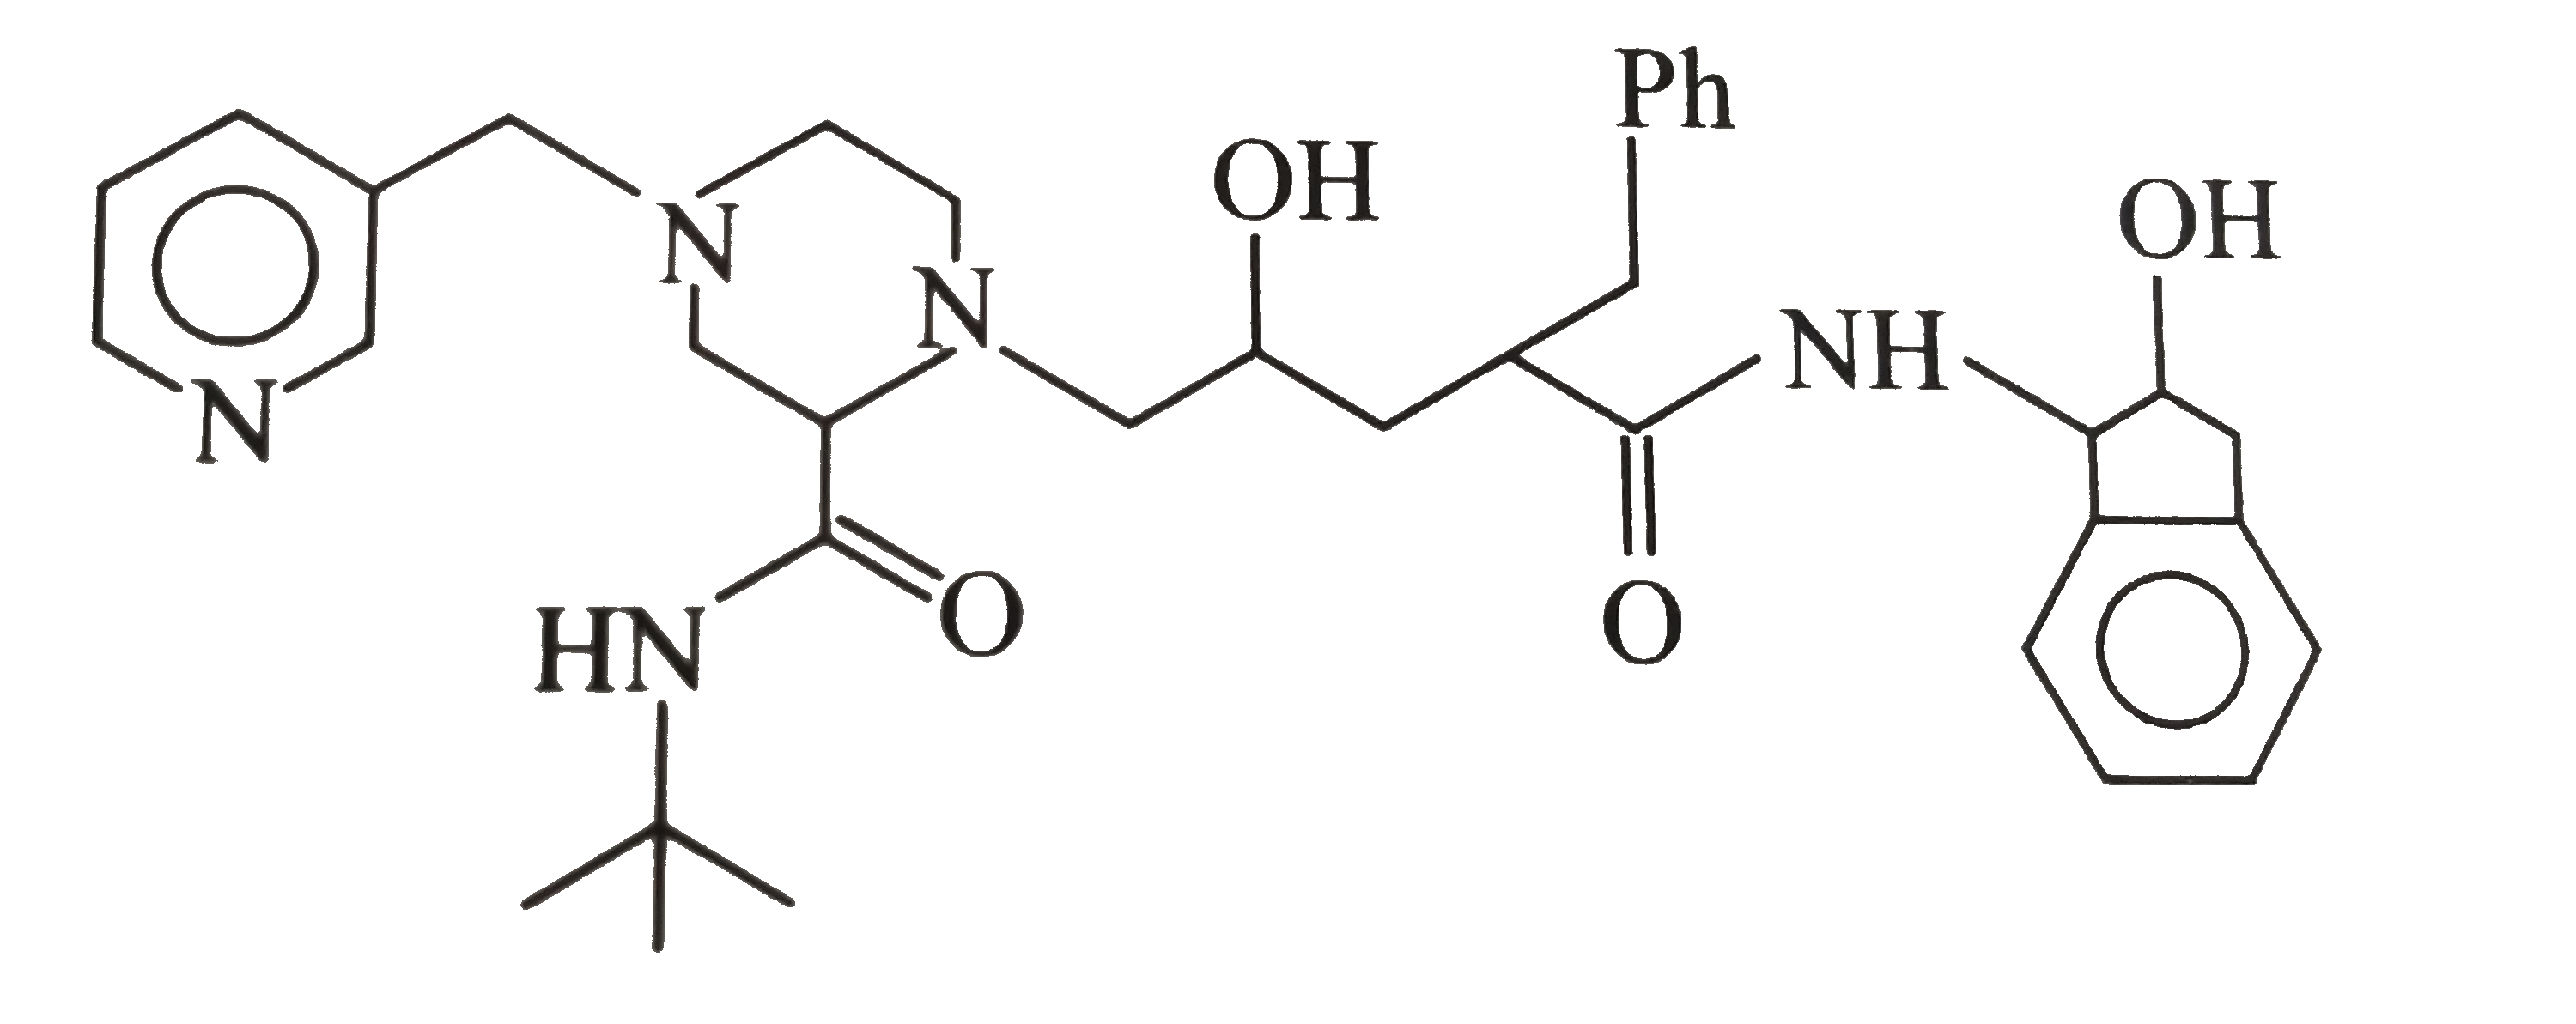 Crixivan, a drug produced by Merck and Co., is widely used in the fight at against AIDS (acquied immune dificiency syndrome). The sturcture of cirxivan is given below:      How may amide groups are present in the compound?